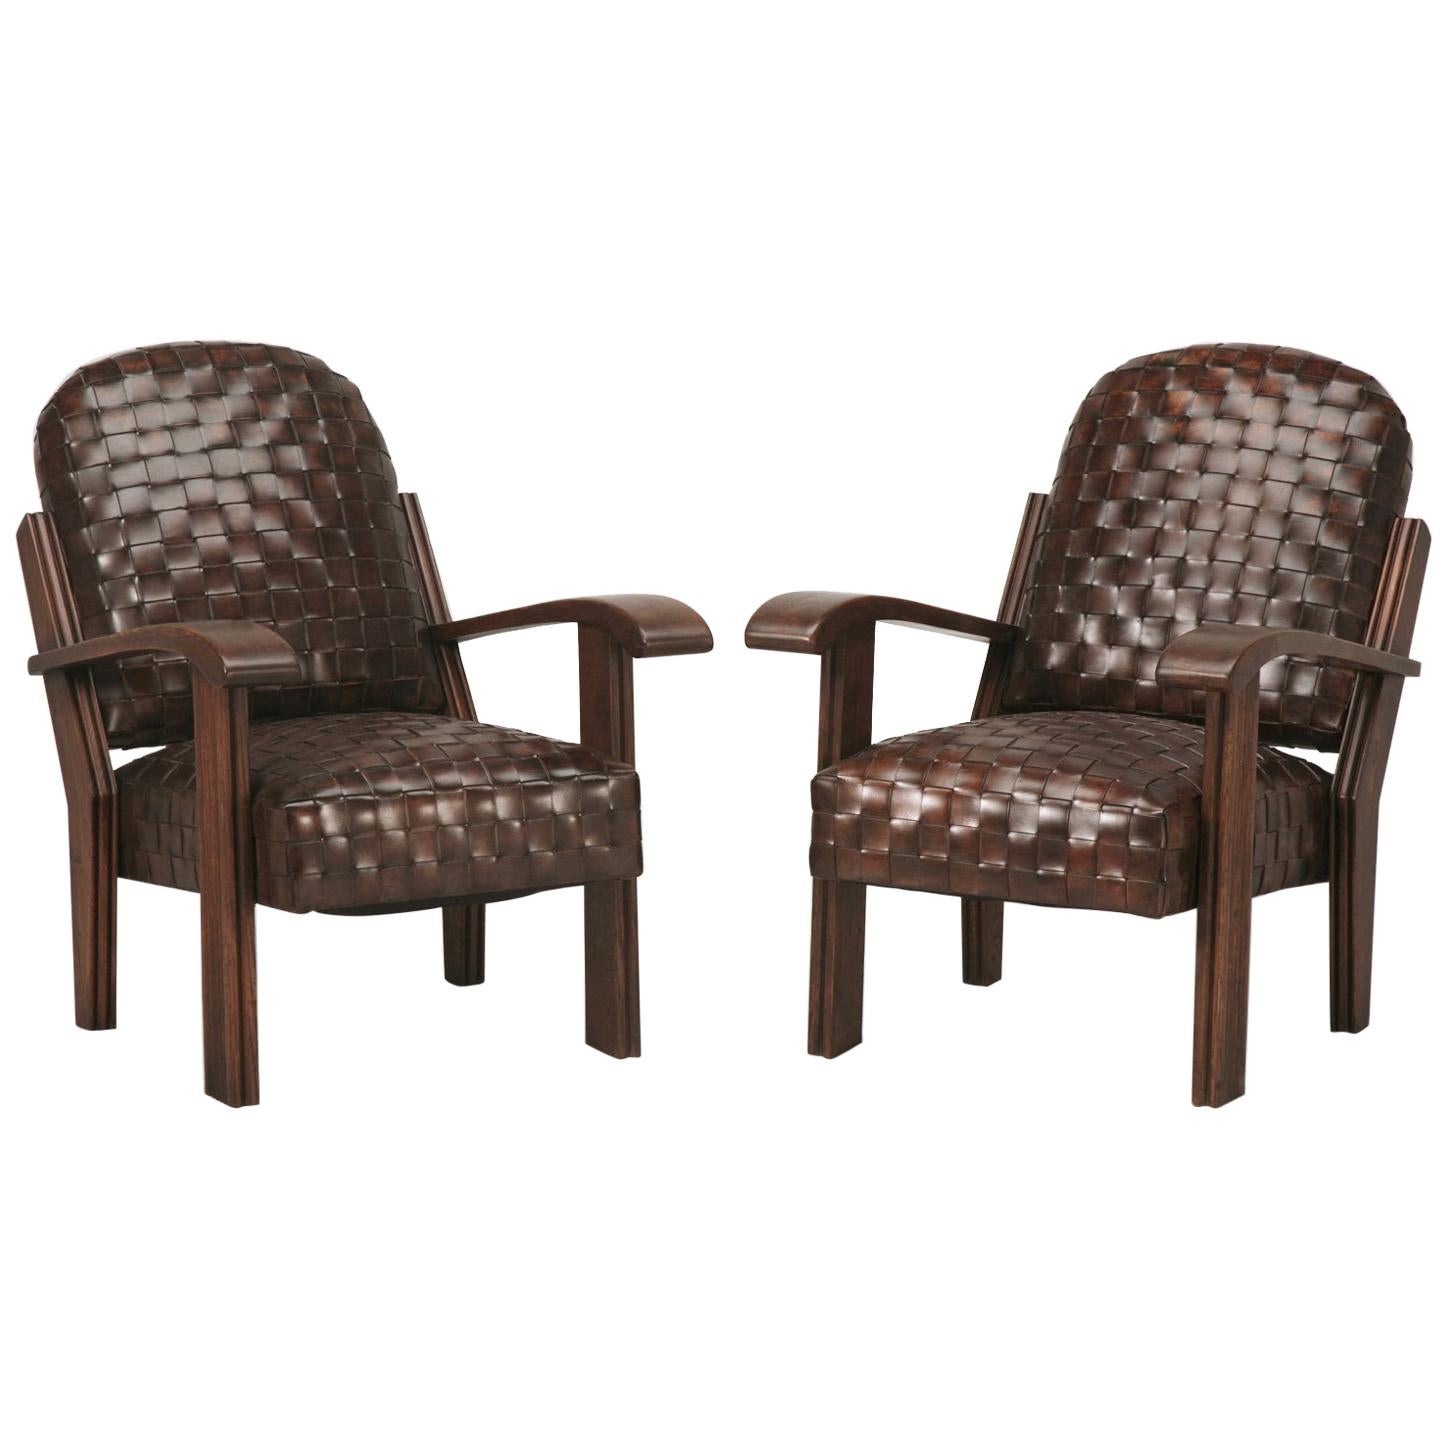 Art Deco or Late Arts & Craft Handwoven Leather Club Chairs For Sale